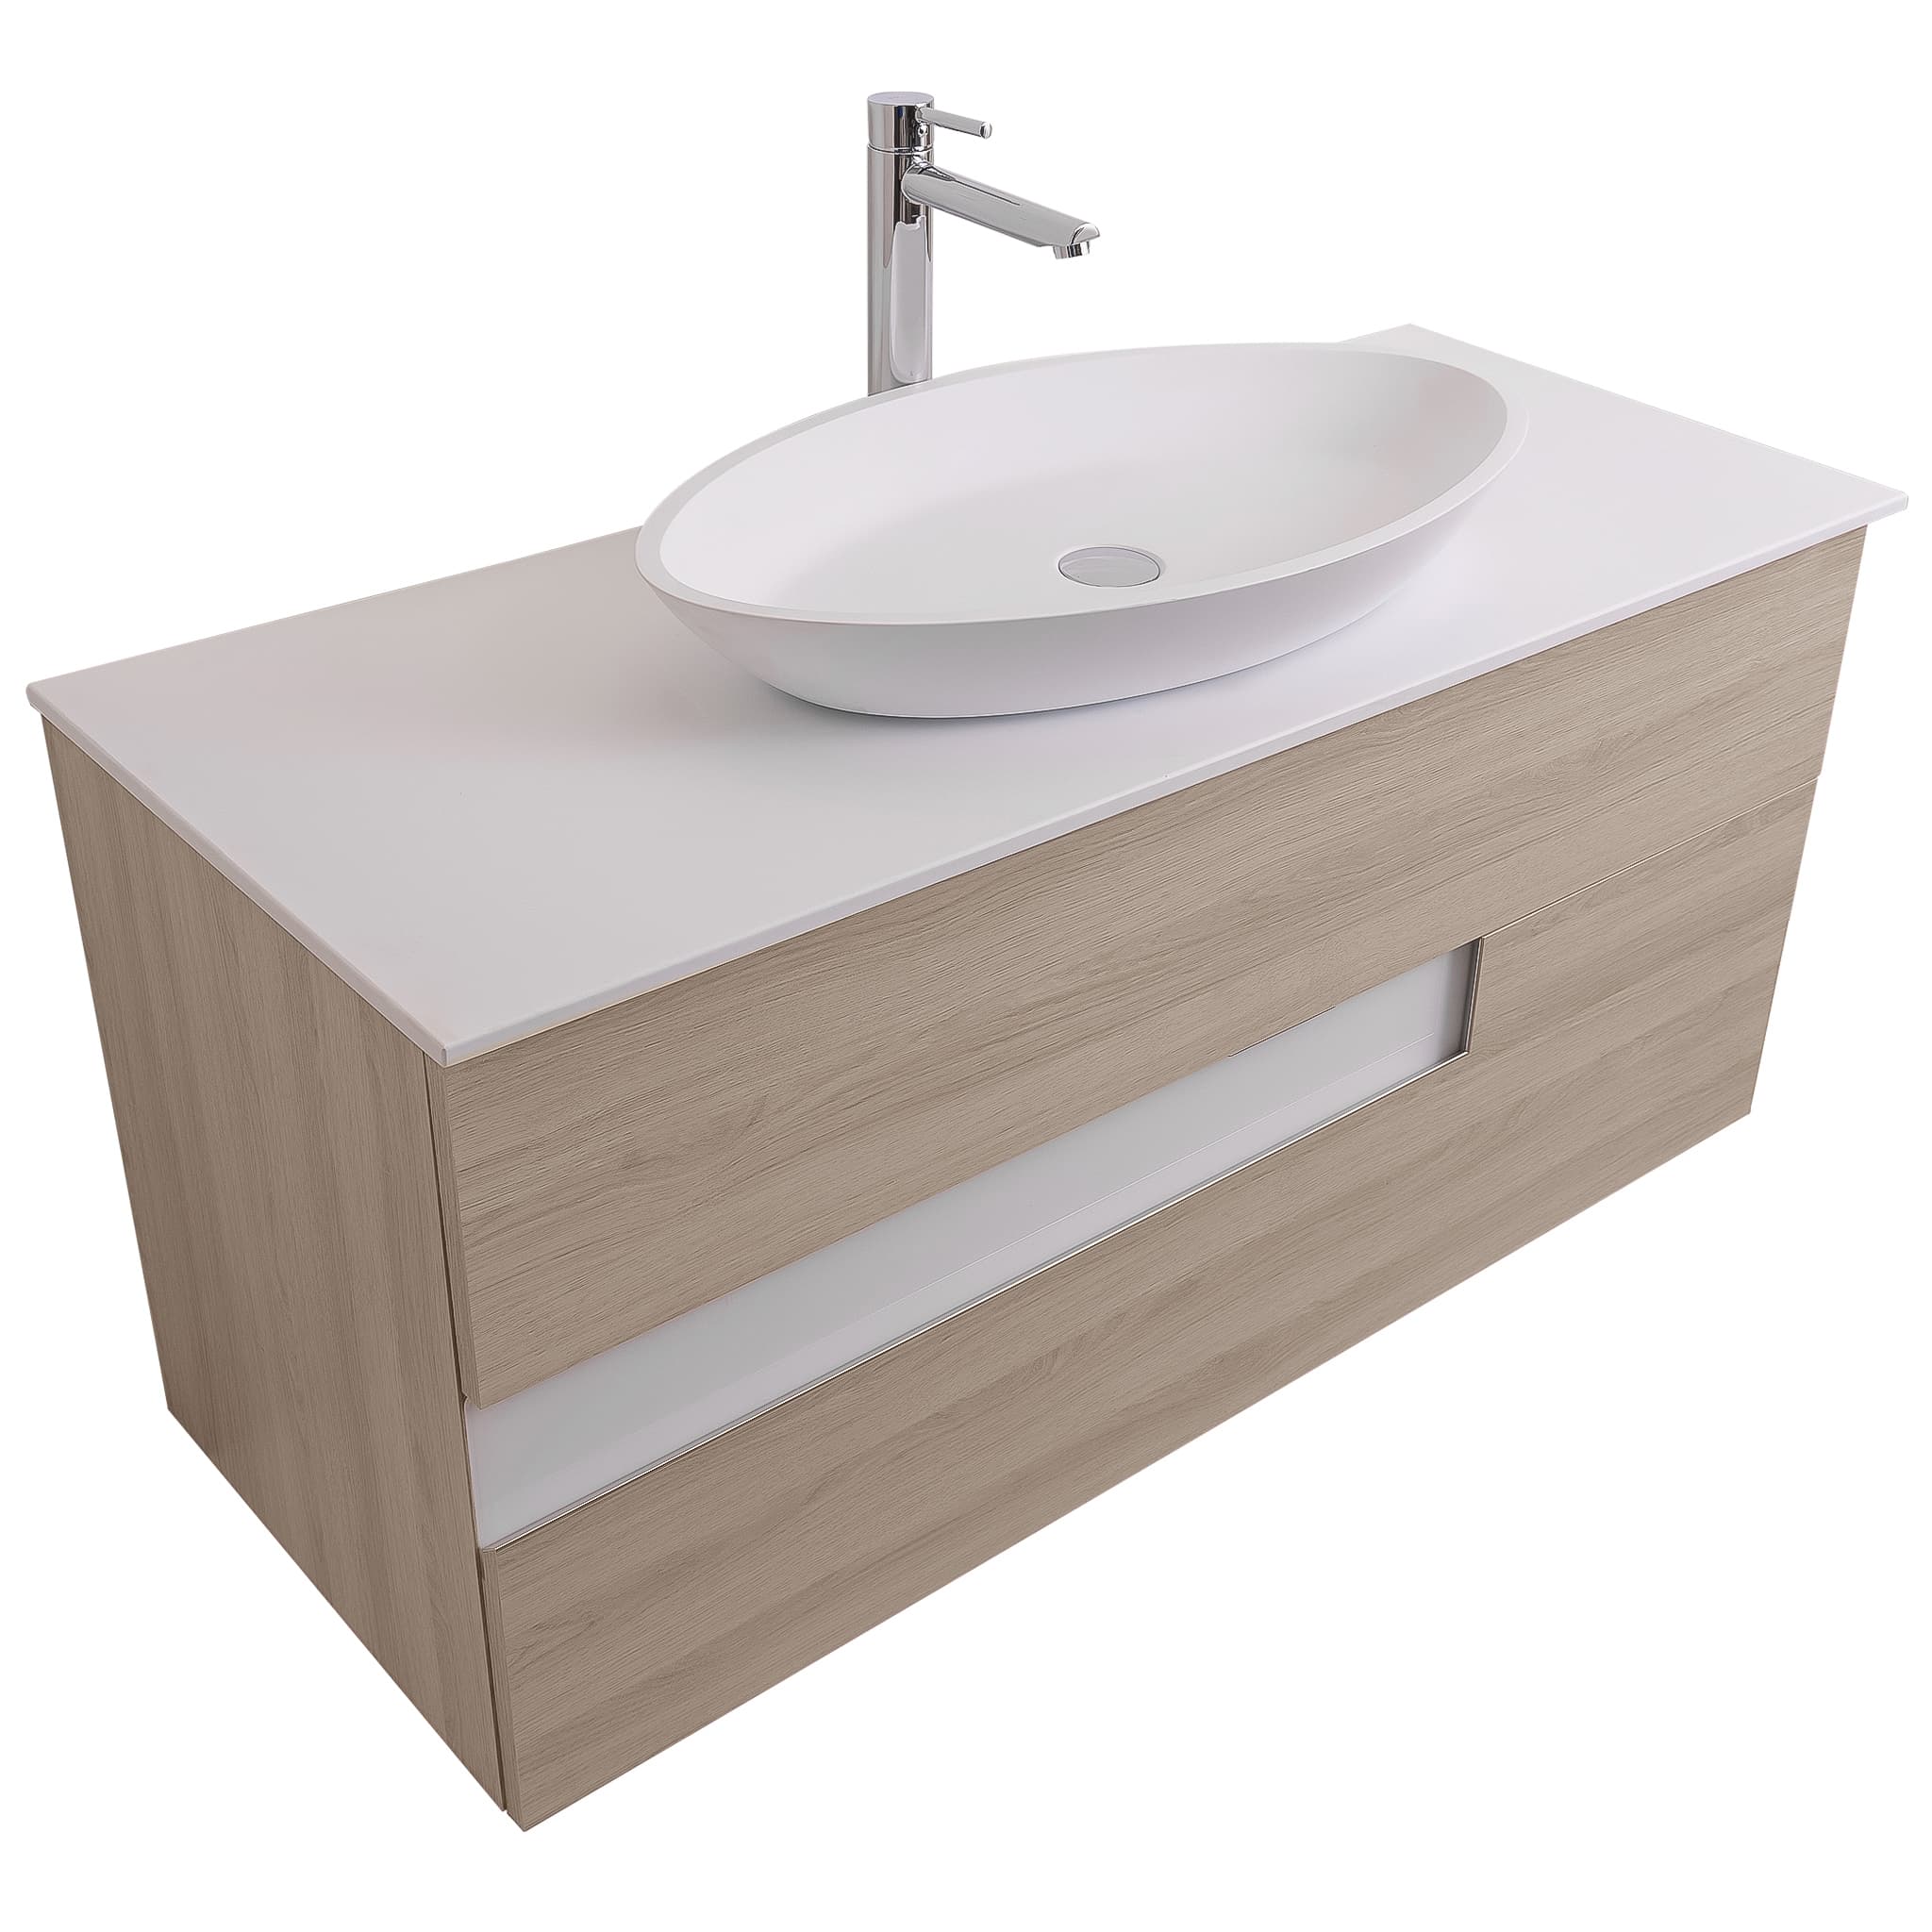 Vision 47.5 Natural Light Wood Cabinet, Solid Surface Flat White Counter And Oval Solid Surface White Basin 1305, Wall Mounted Modern Vanity Set